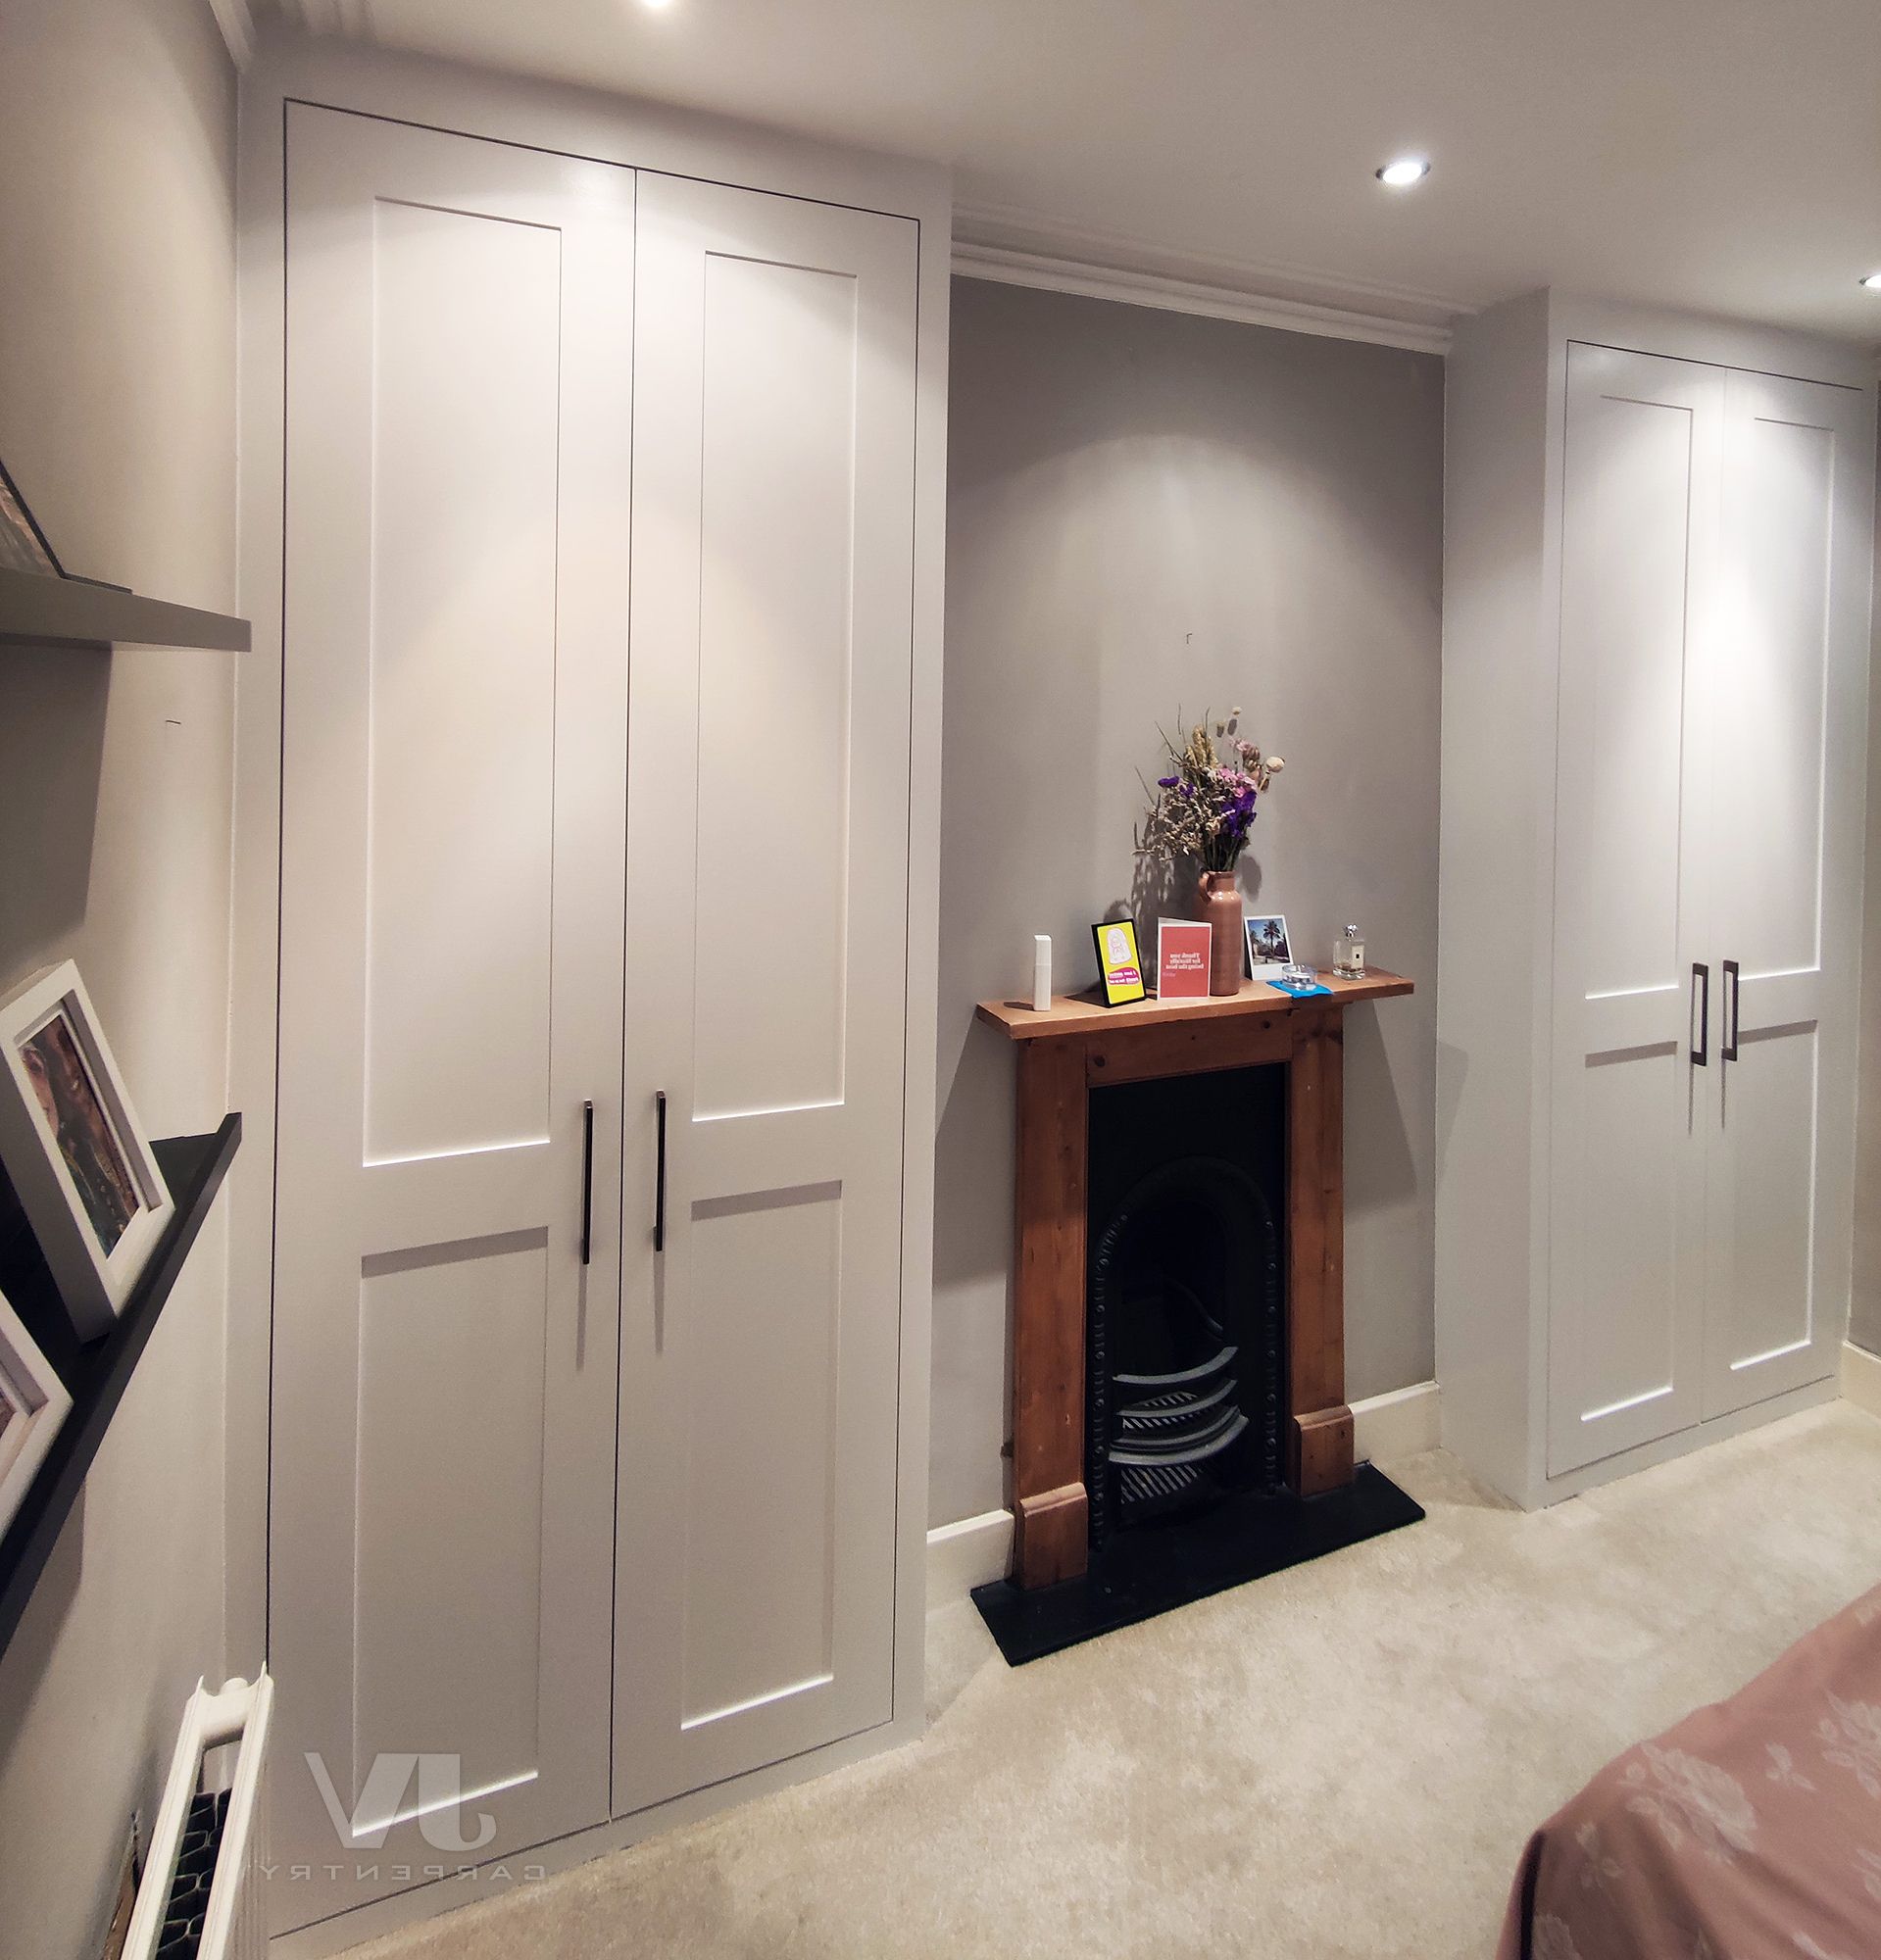 Alcove Wardrobes On Either Side Of The Chimney | London | Jv Carpentry Throughout Alcove Wardrobes (Gallery 7 of 20)